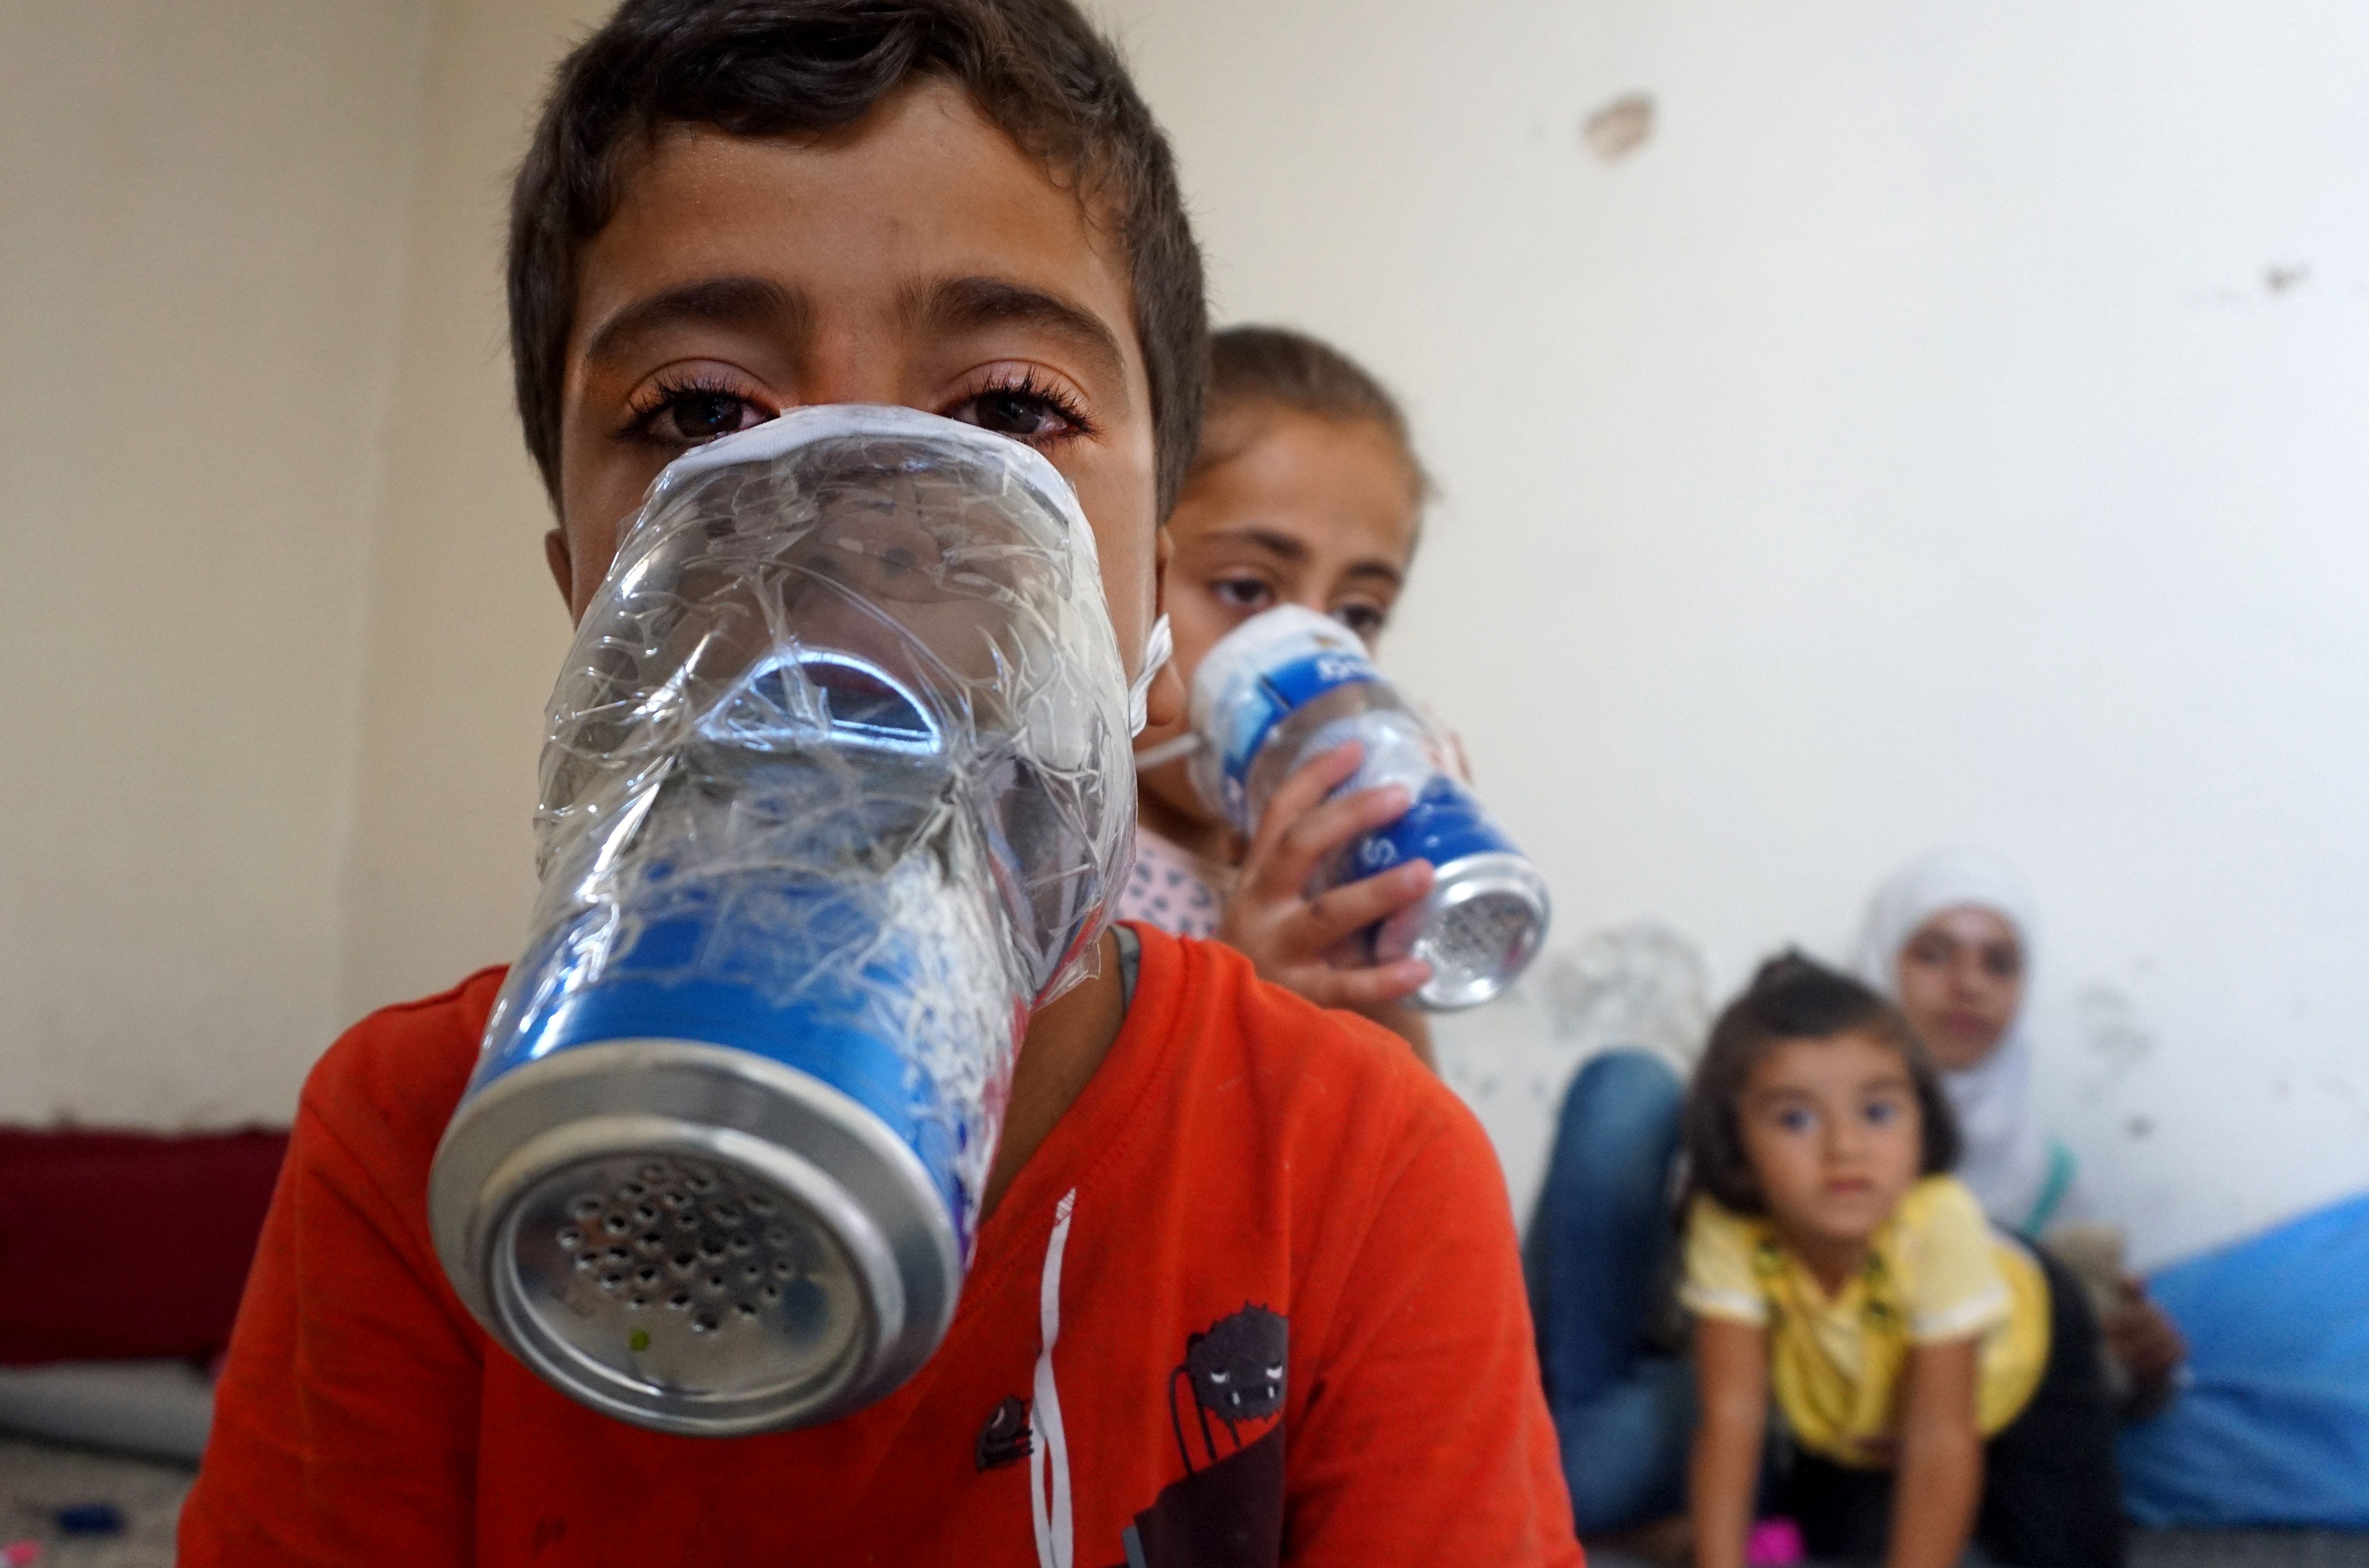 Children try improvised gas masks in their home in Binnish in Syria's rebel-held northern Idlib province as part of preparations for any upcoming raids on Sept. 12, 2018. The Syrian regime and its Russian ally are threatening an offensive to retake t